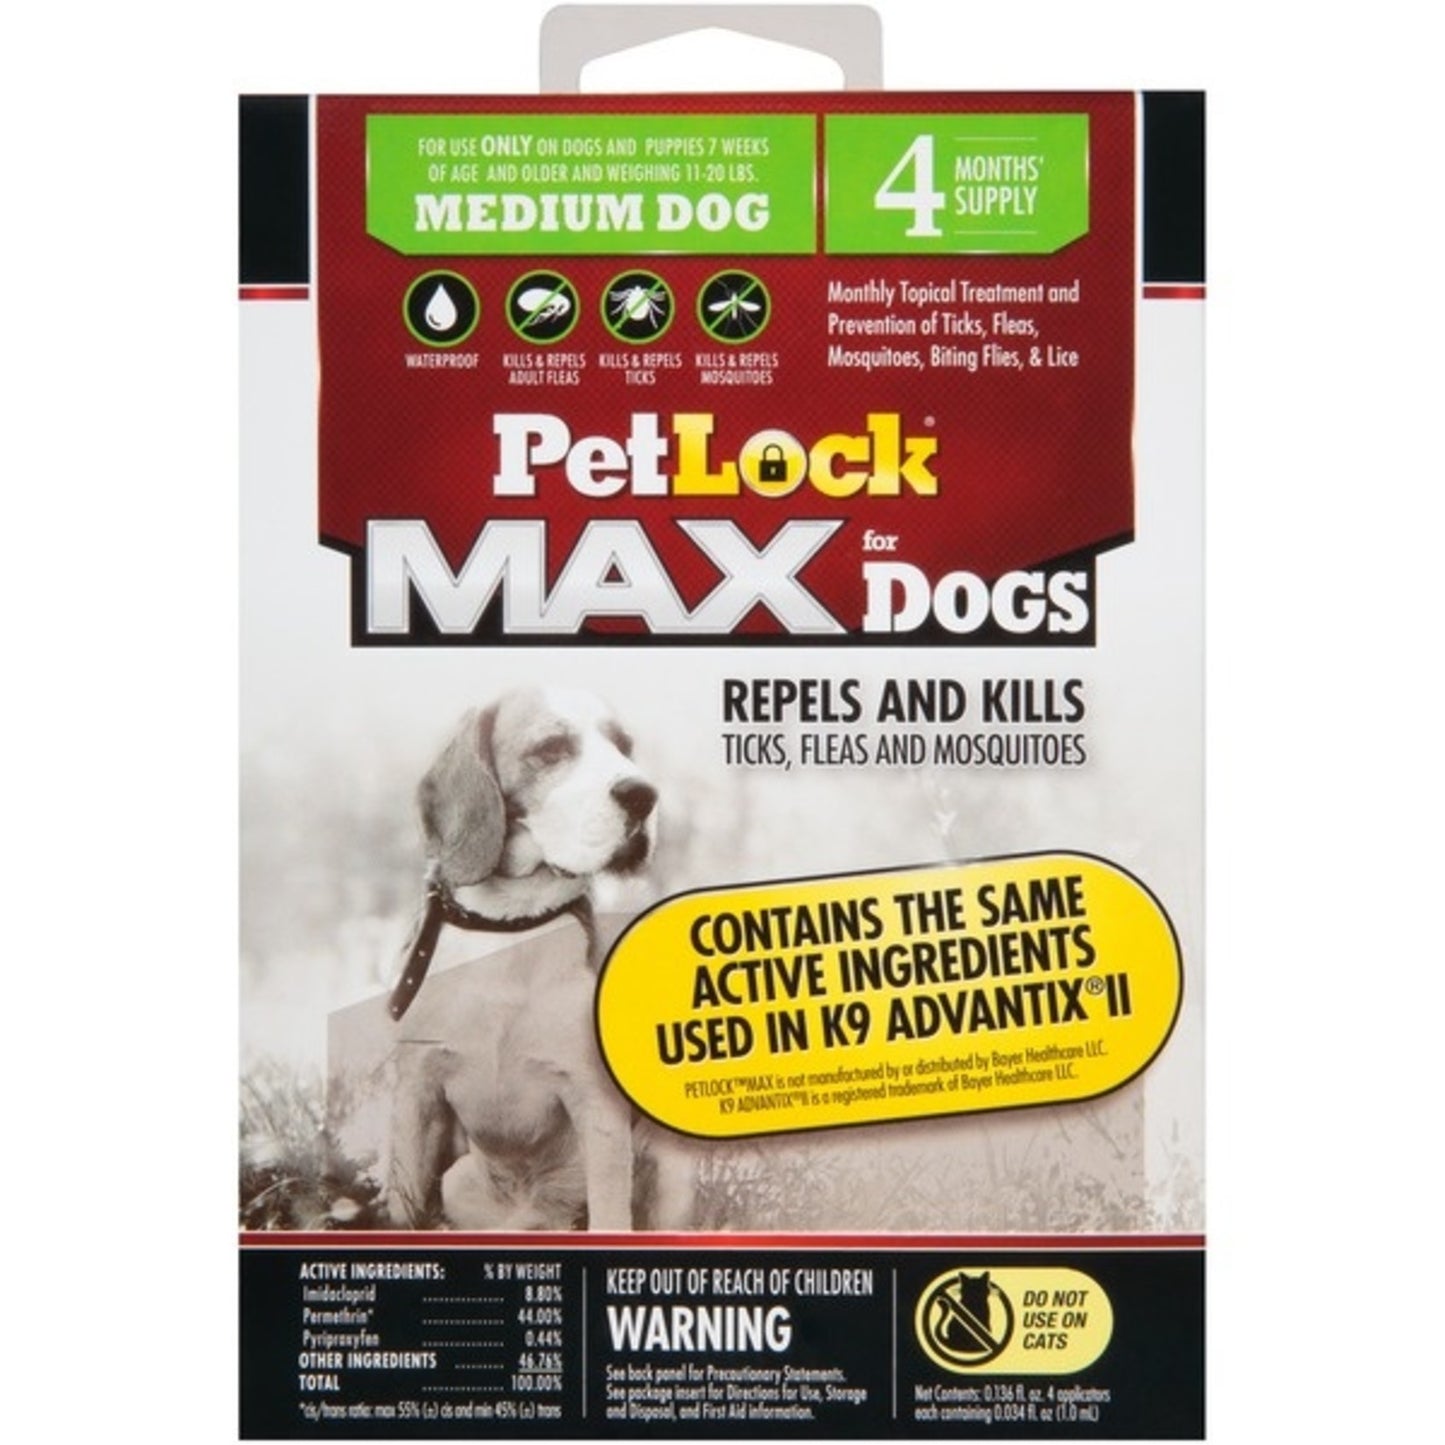 PetLock Max for Dogs - 4 Month Supply